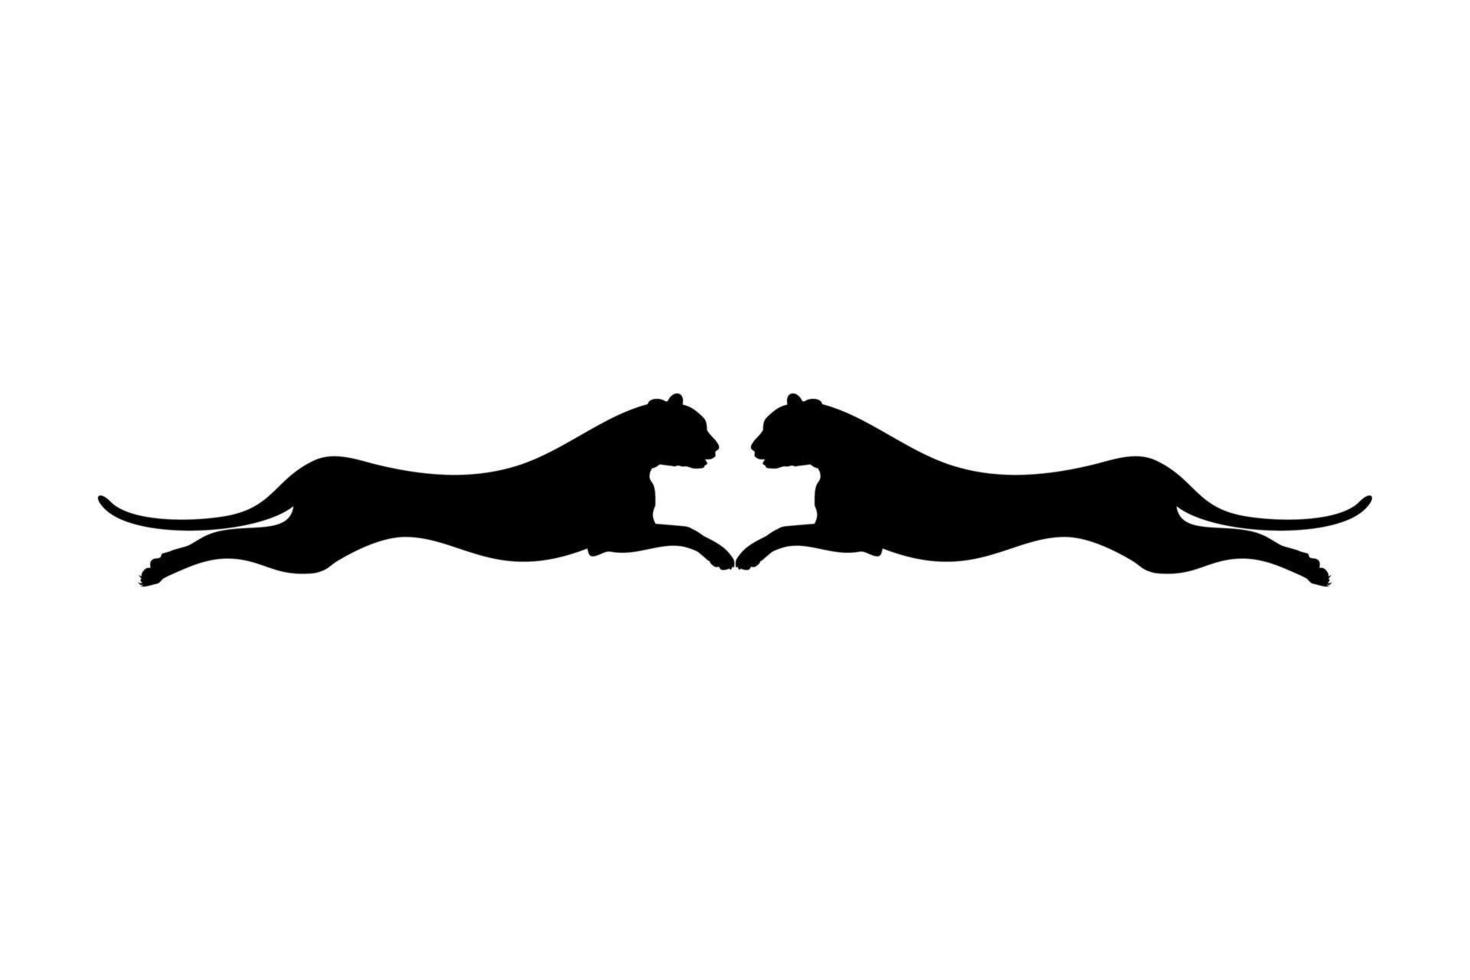 Silhouette of the Jumping Pair of the Wild Cat, Tiger, Leopard, Panther, Cheetah, Jaguar, Puma and Big Cat Family, for Logo, Pictogram, Website, or Graphic Design Element. Vector Illustration